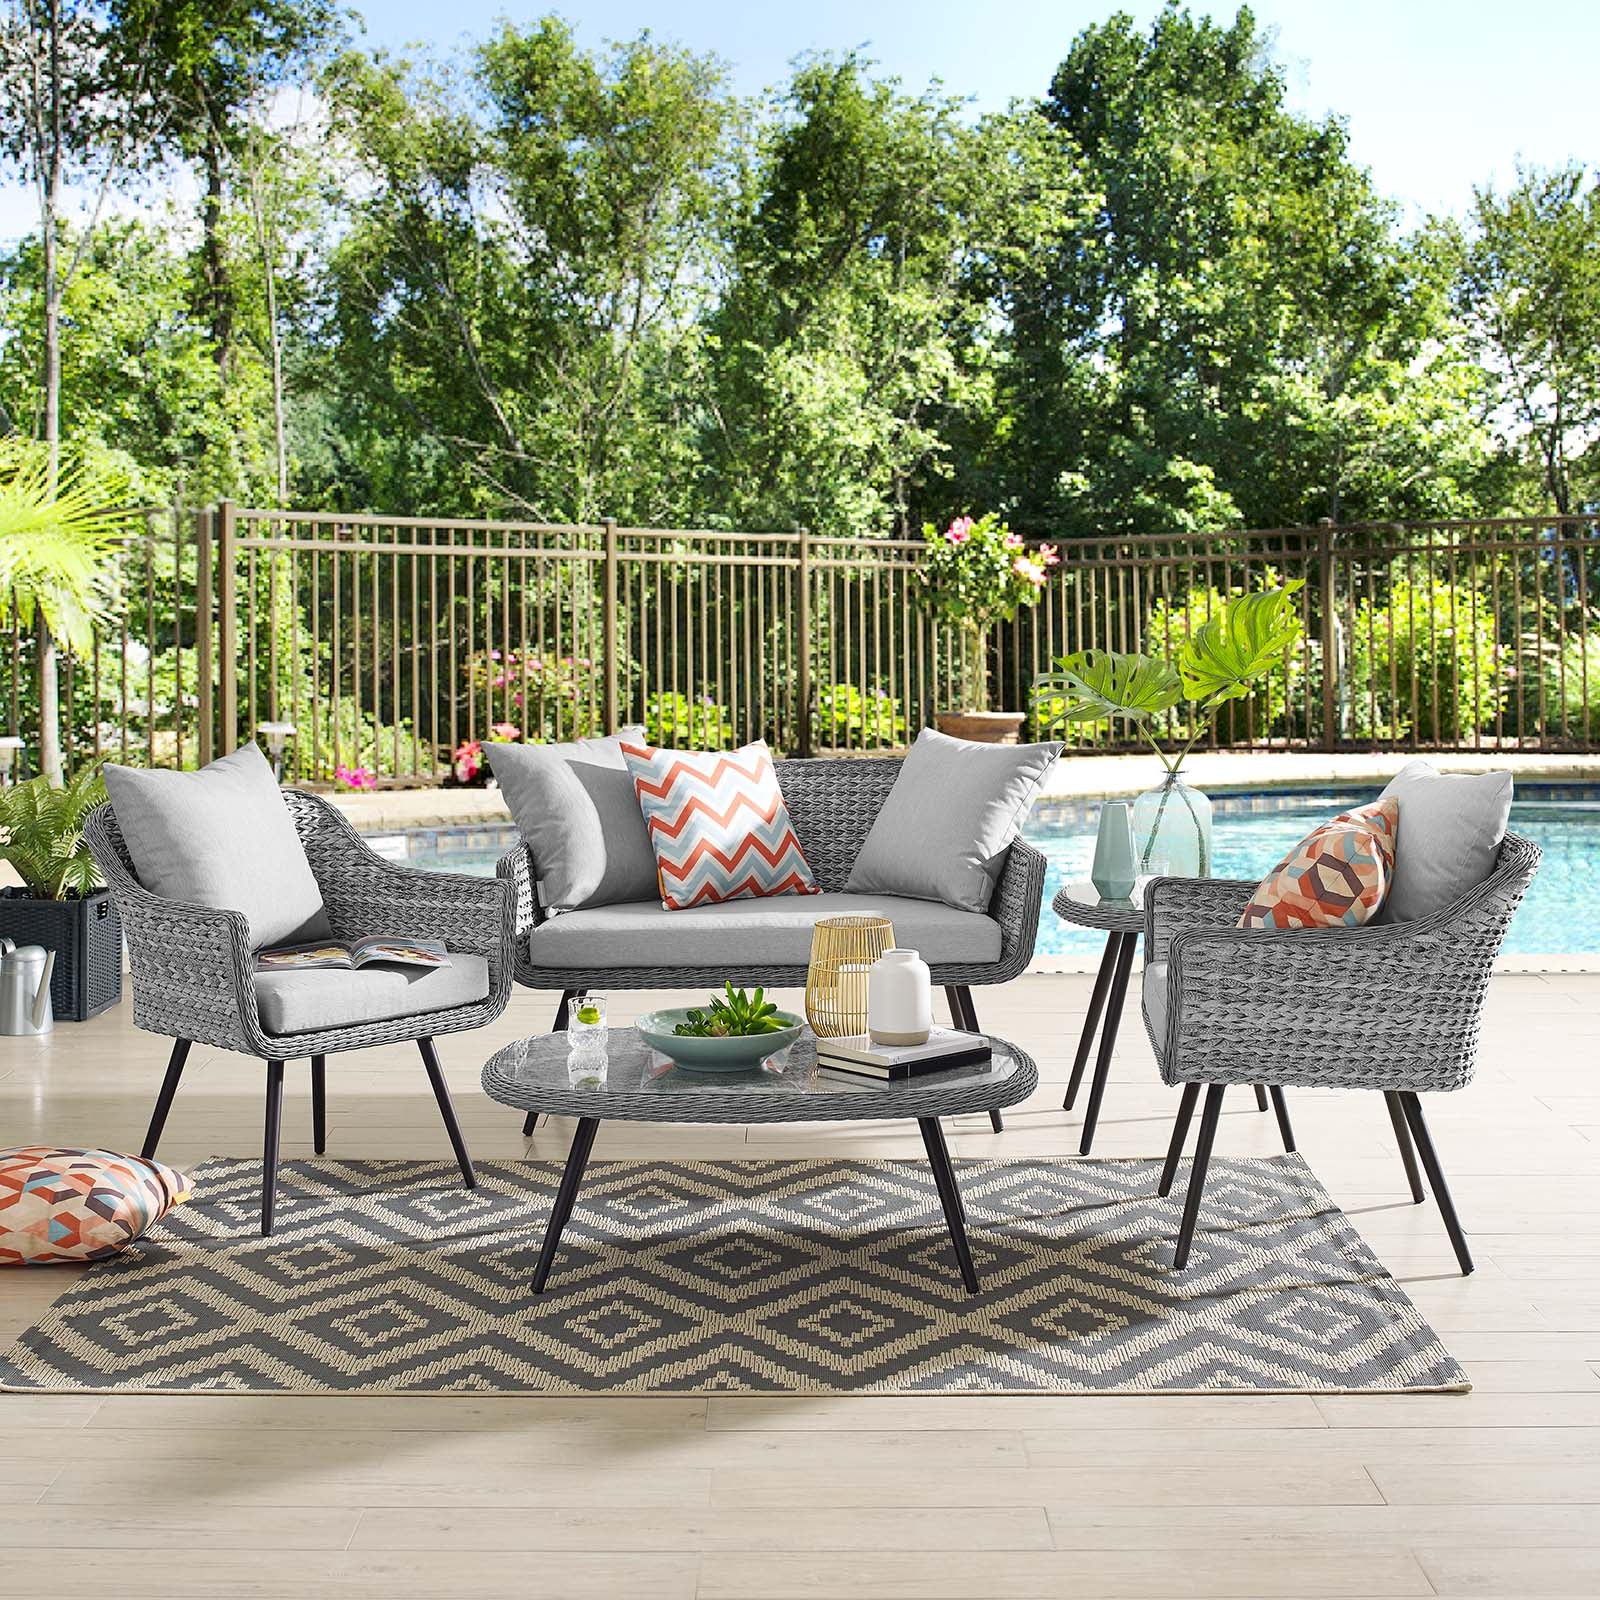 Endeavor 5 Piece Outdoor Patio Wicker Rattan Loveseat Armchair Coffee Table and Side Table Set - East Shore Modern Home Furnishings